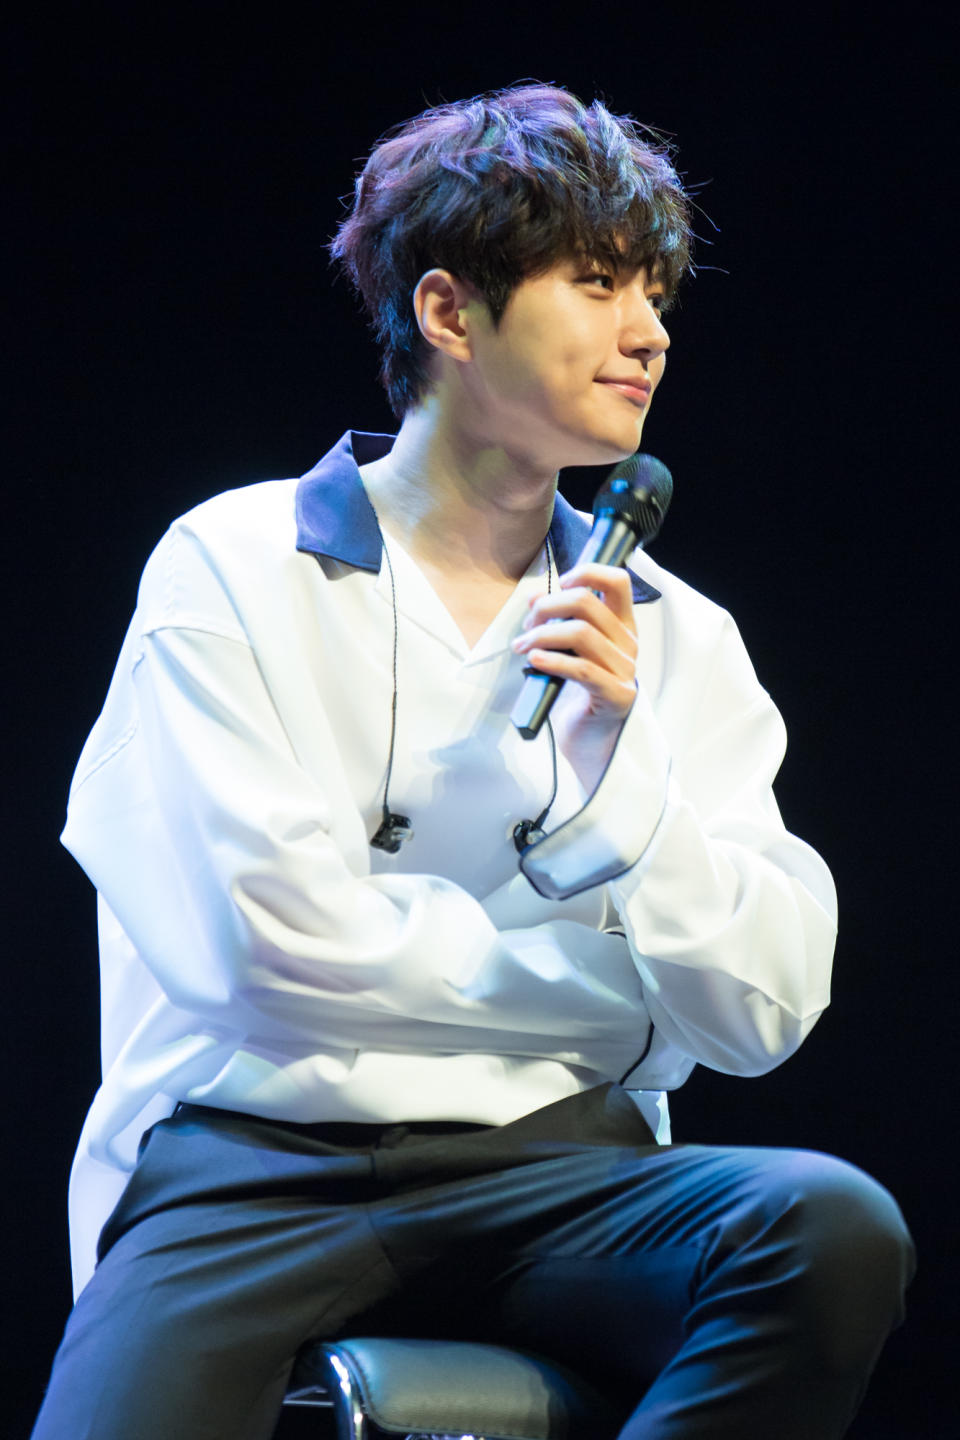 INFINITE’s Kim Myung-soo at his first fan meeting in Singapore (Photo: PTO Entertainment Pte Ltd)